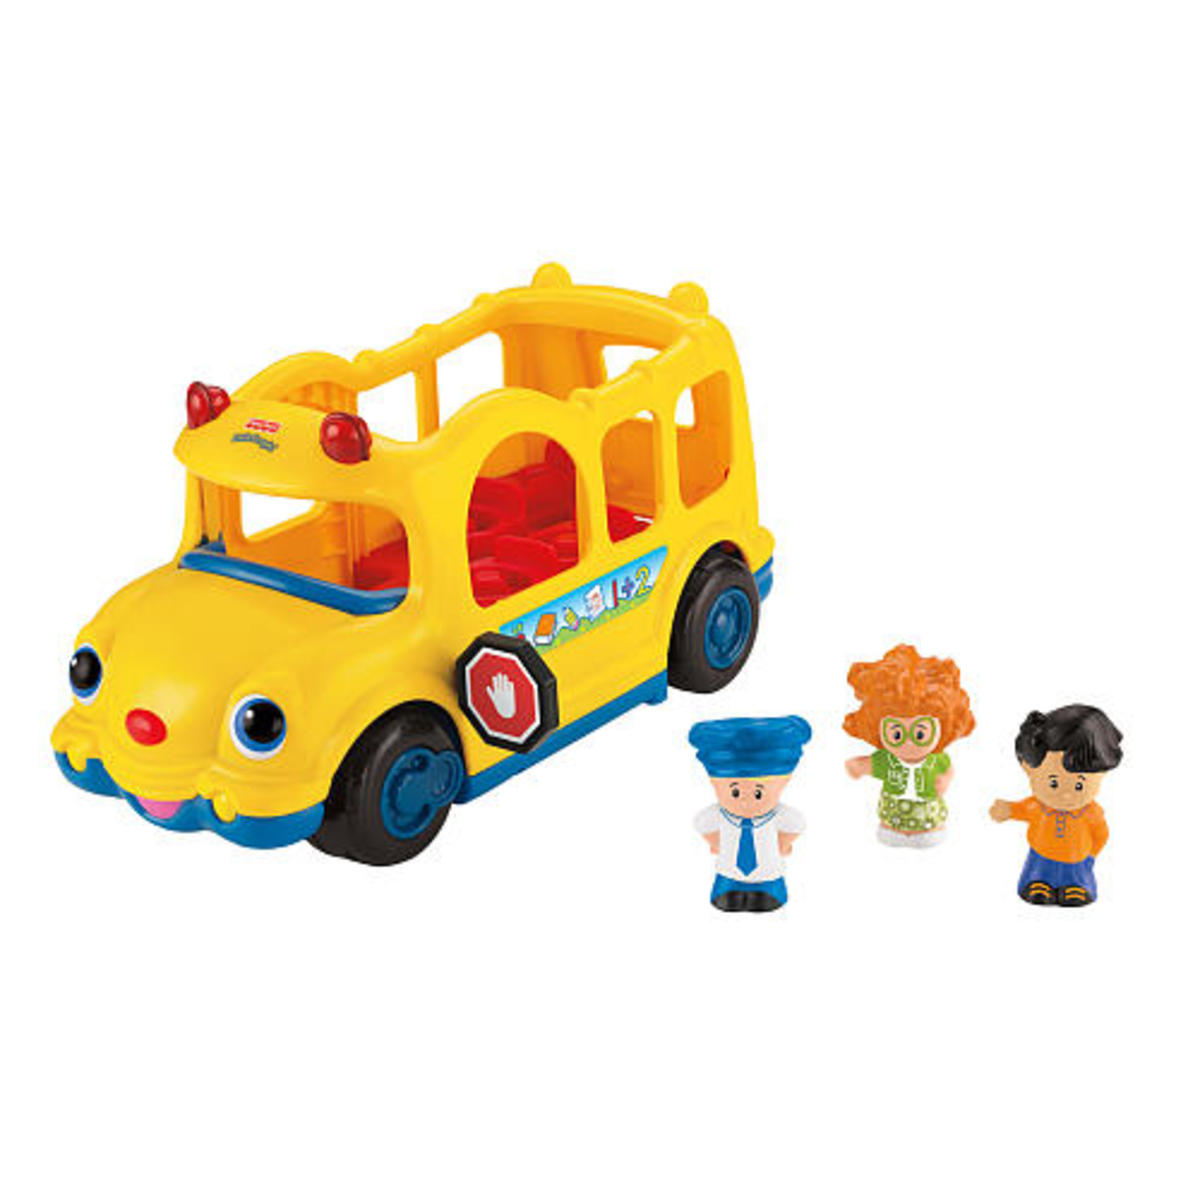 A Timeless Learning Toy-Fisher-Price Little People Lil' Movers School Bus